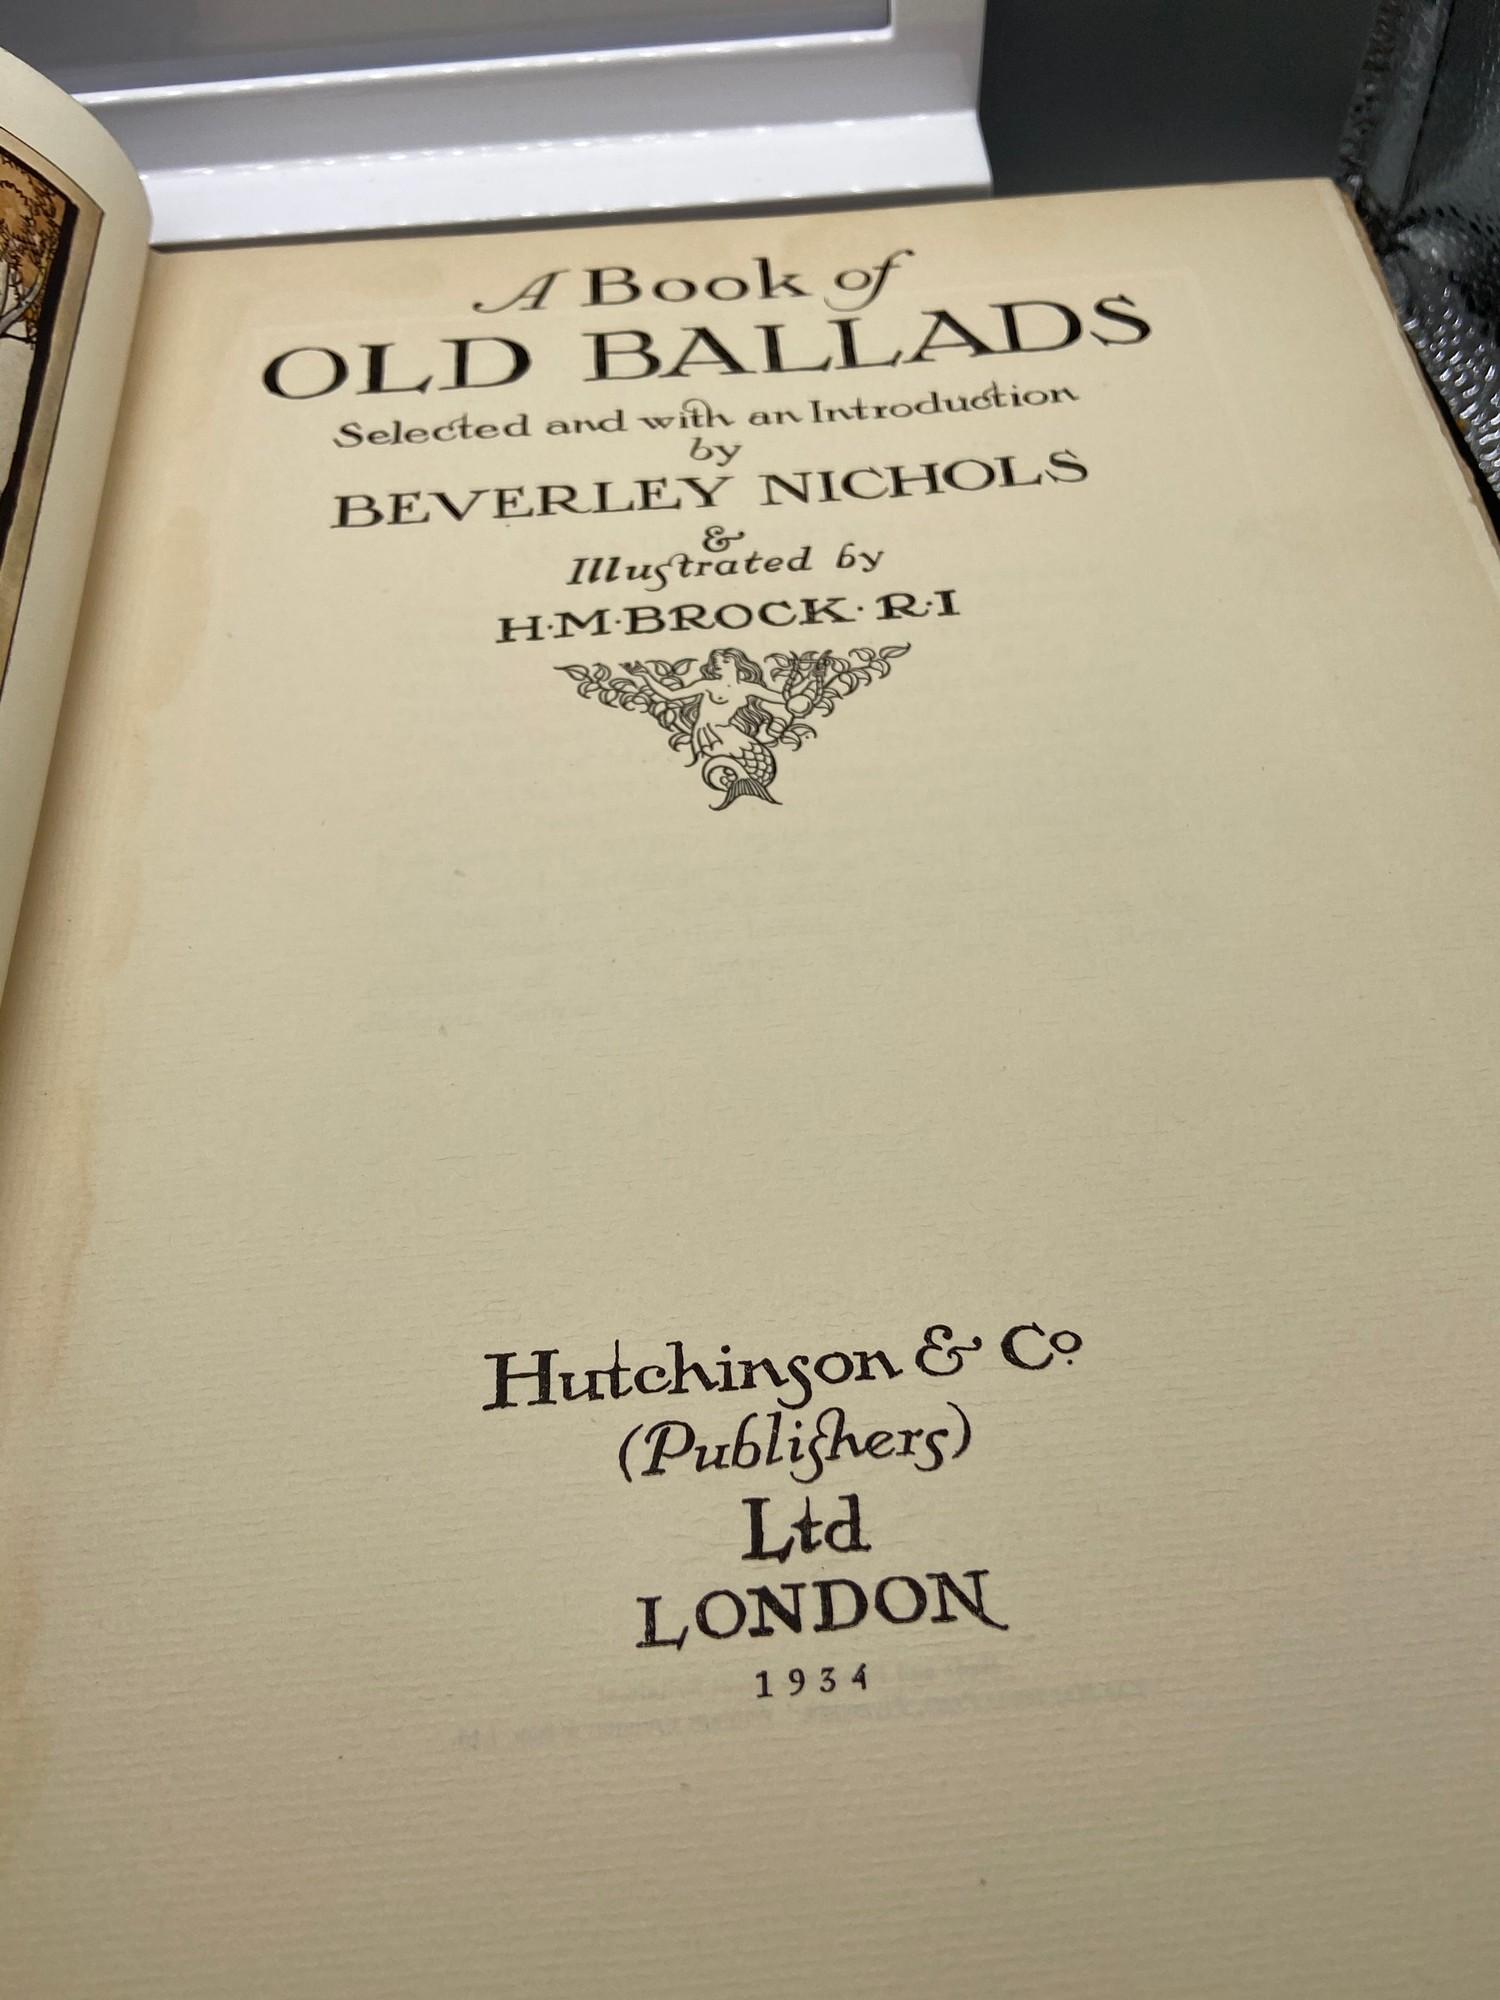 A 1st Edition book of old ballads selected and with an introduction by Beverley Nichols. - Image 4 of 8